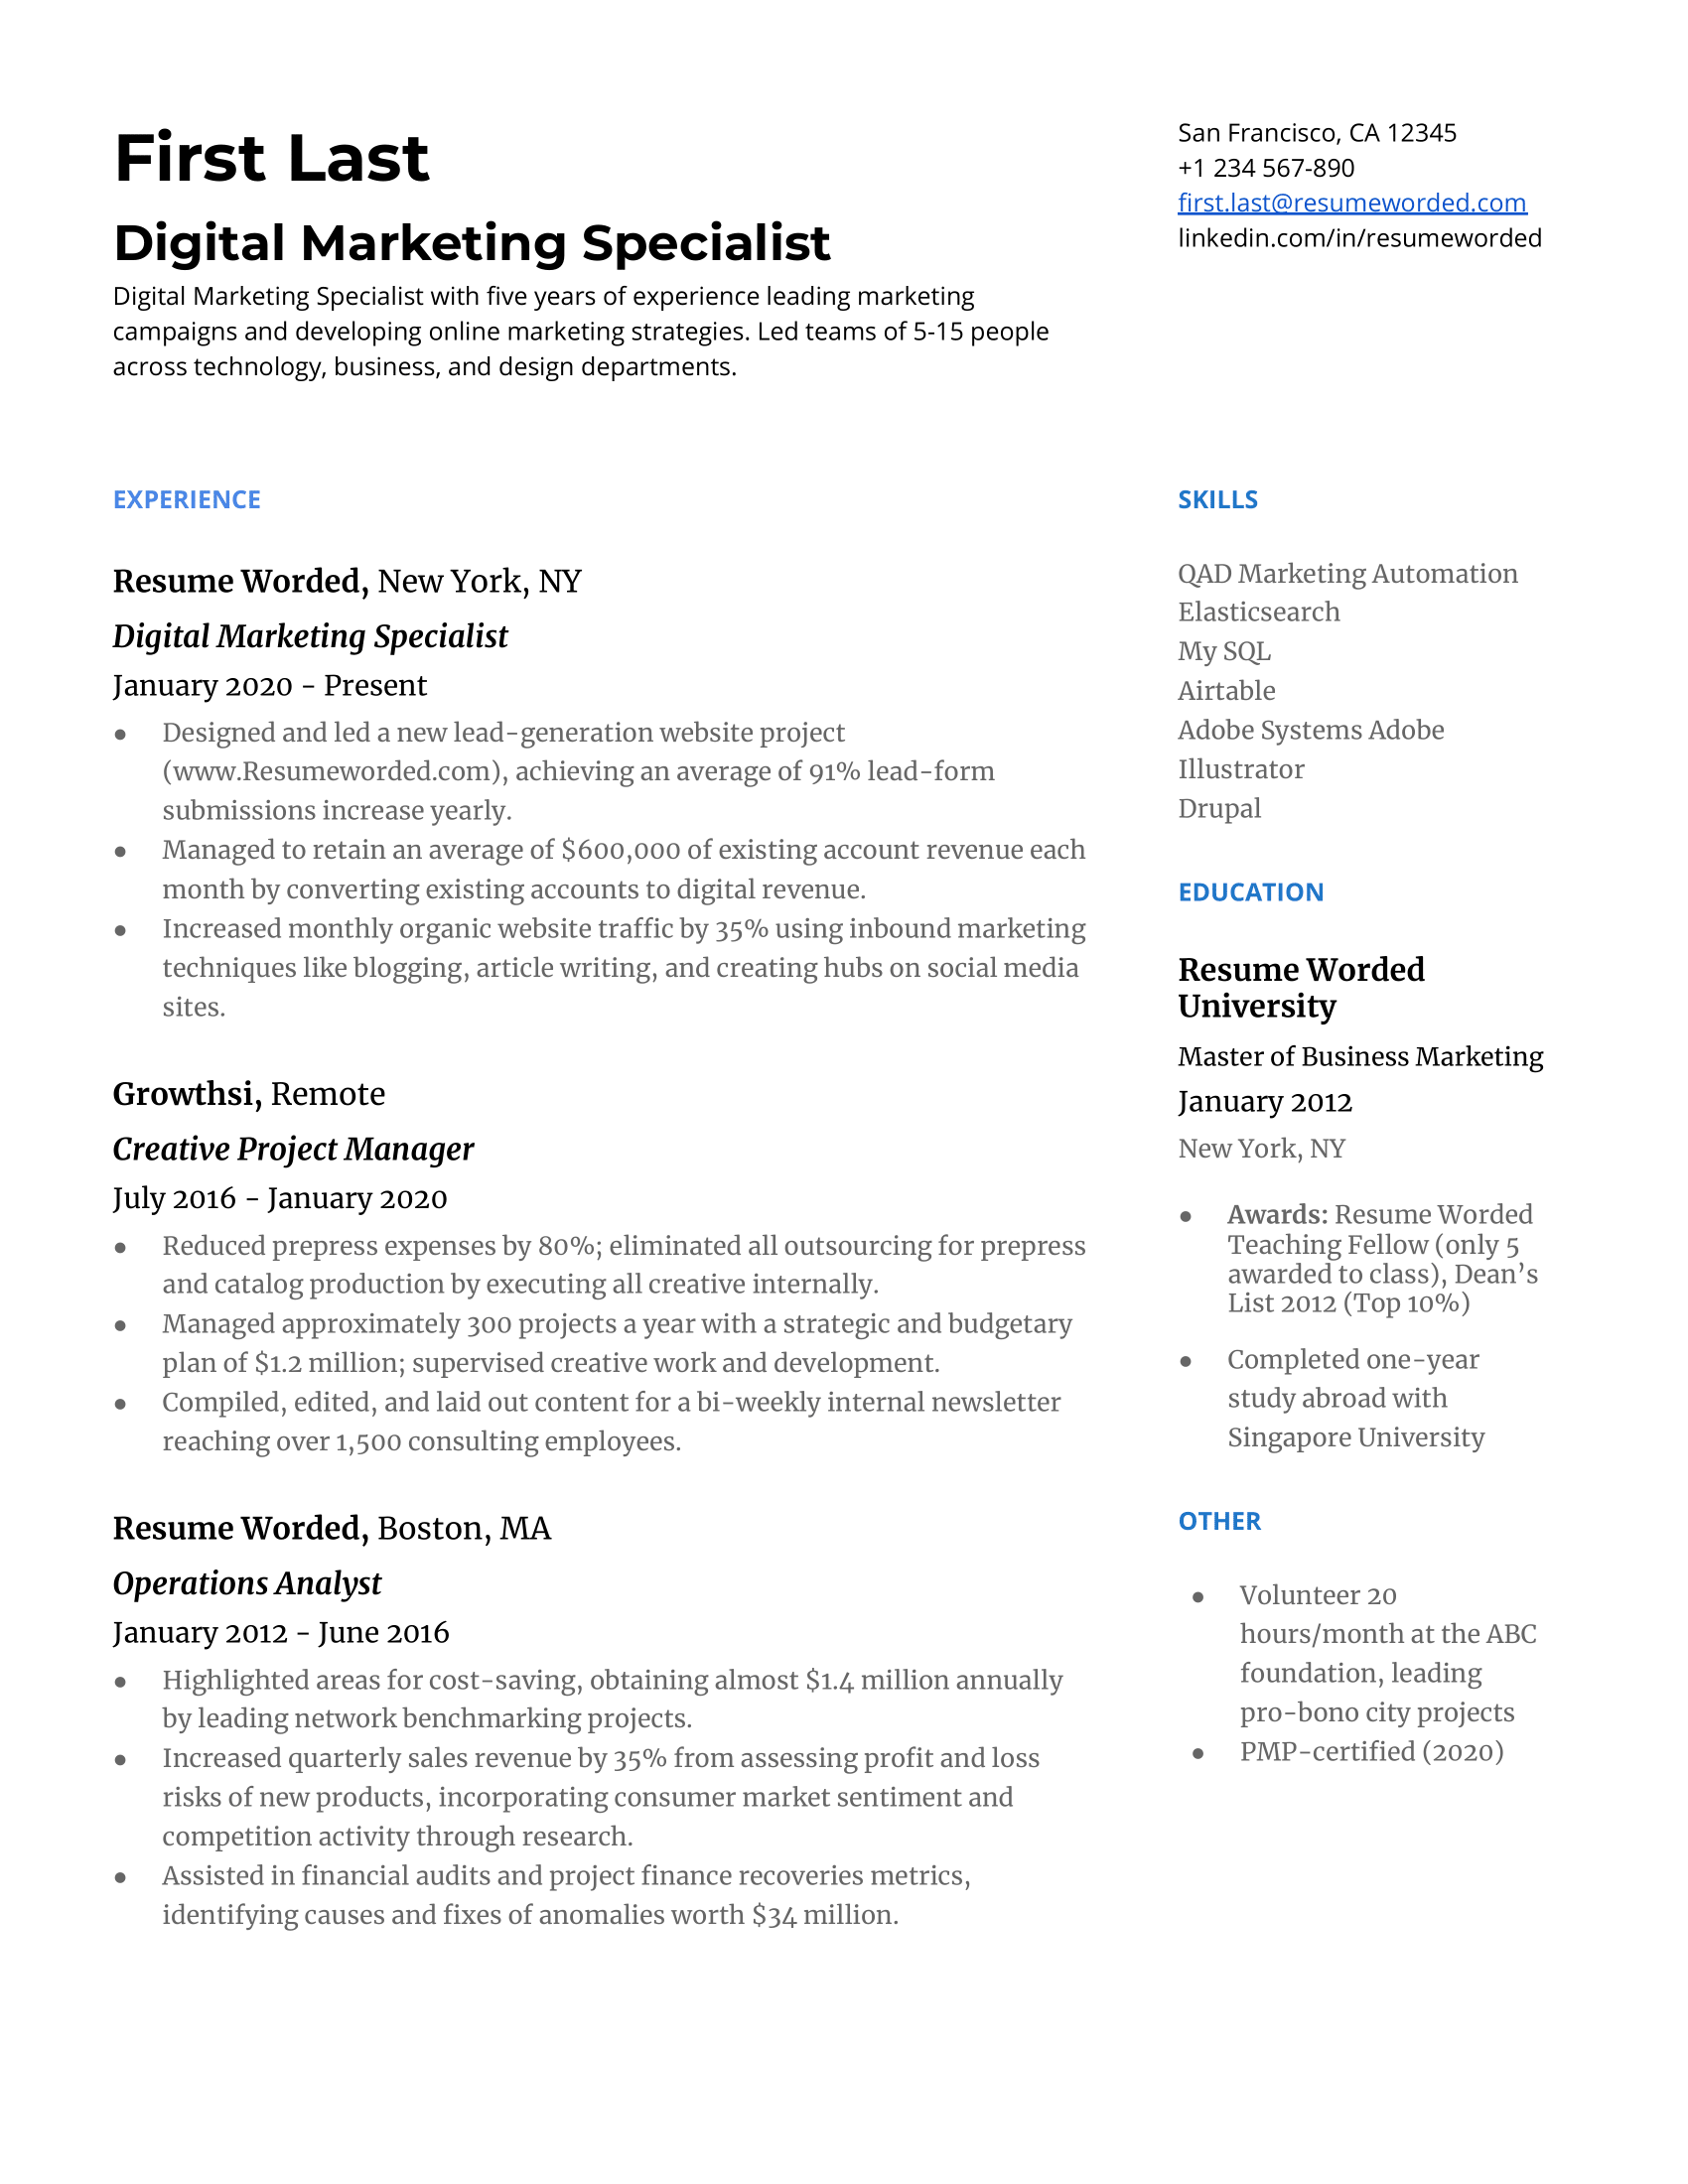 A digital marketing specialist resume template highlighting creative and technical skills.